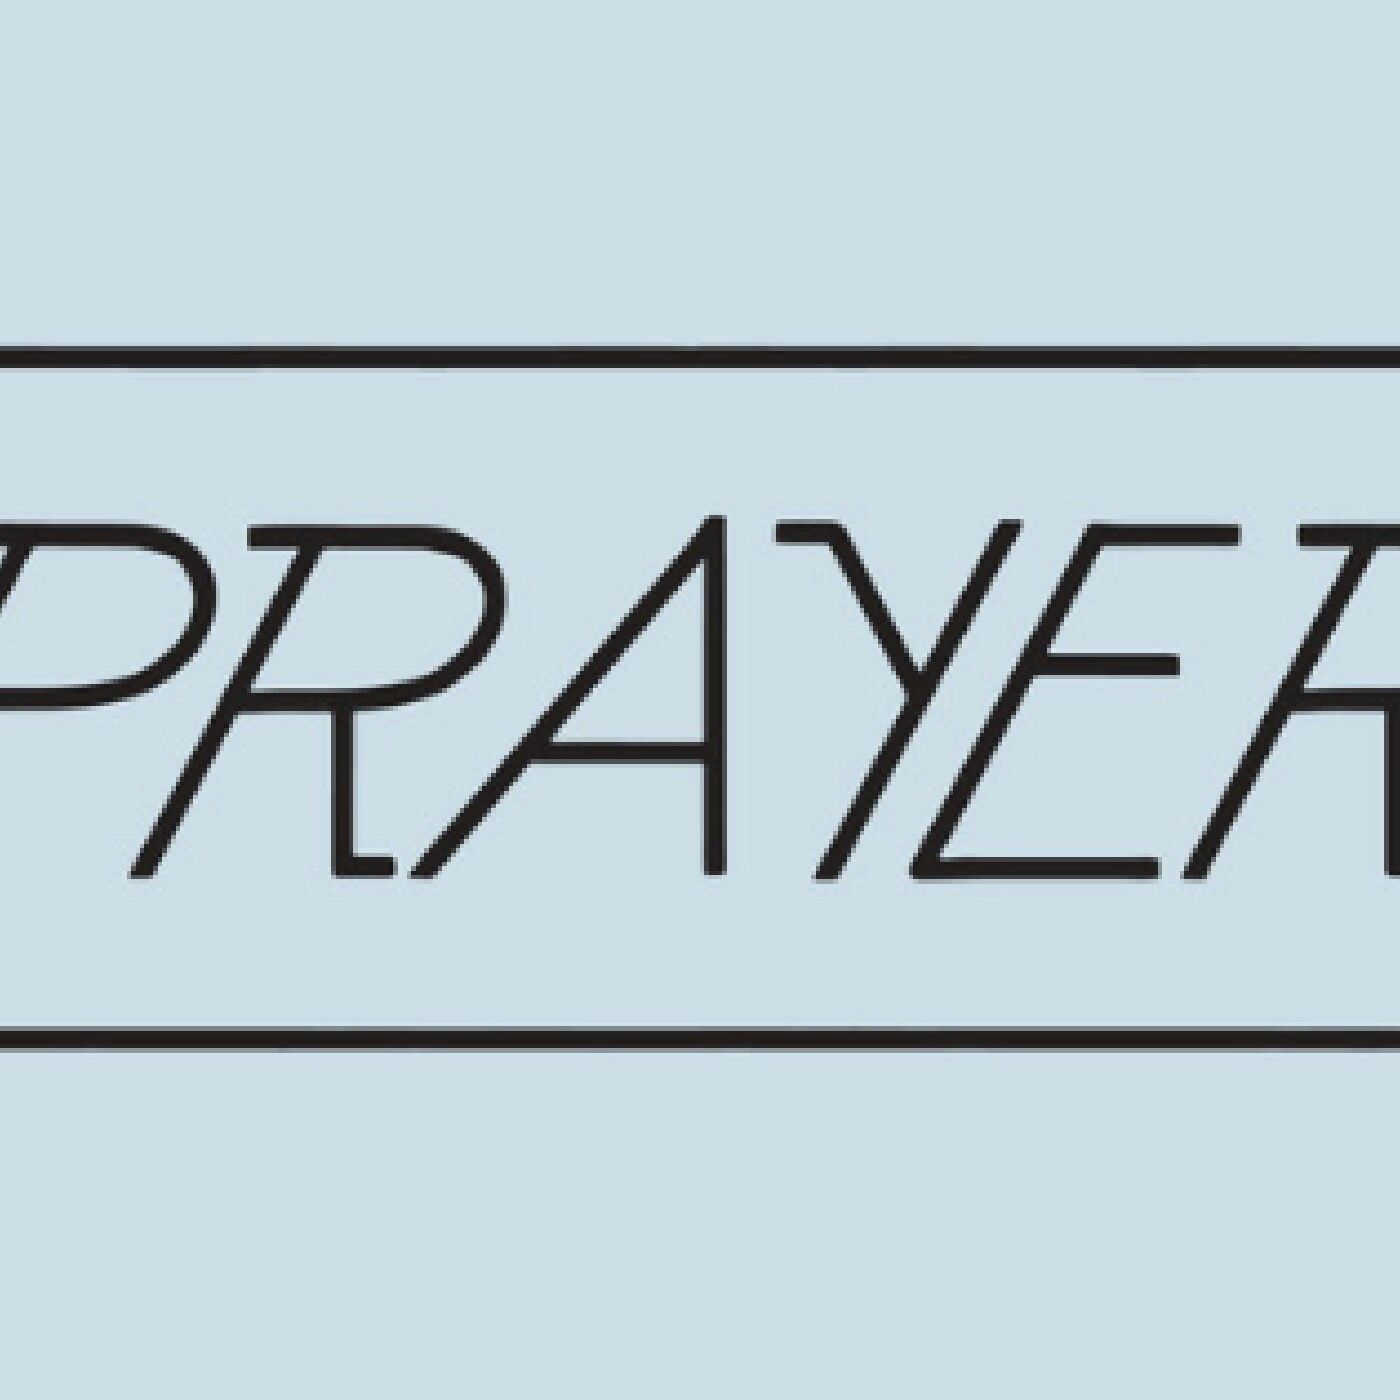 Prayer Is For Anyone!